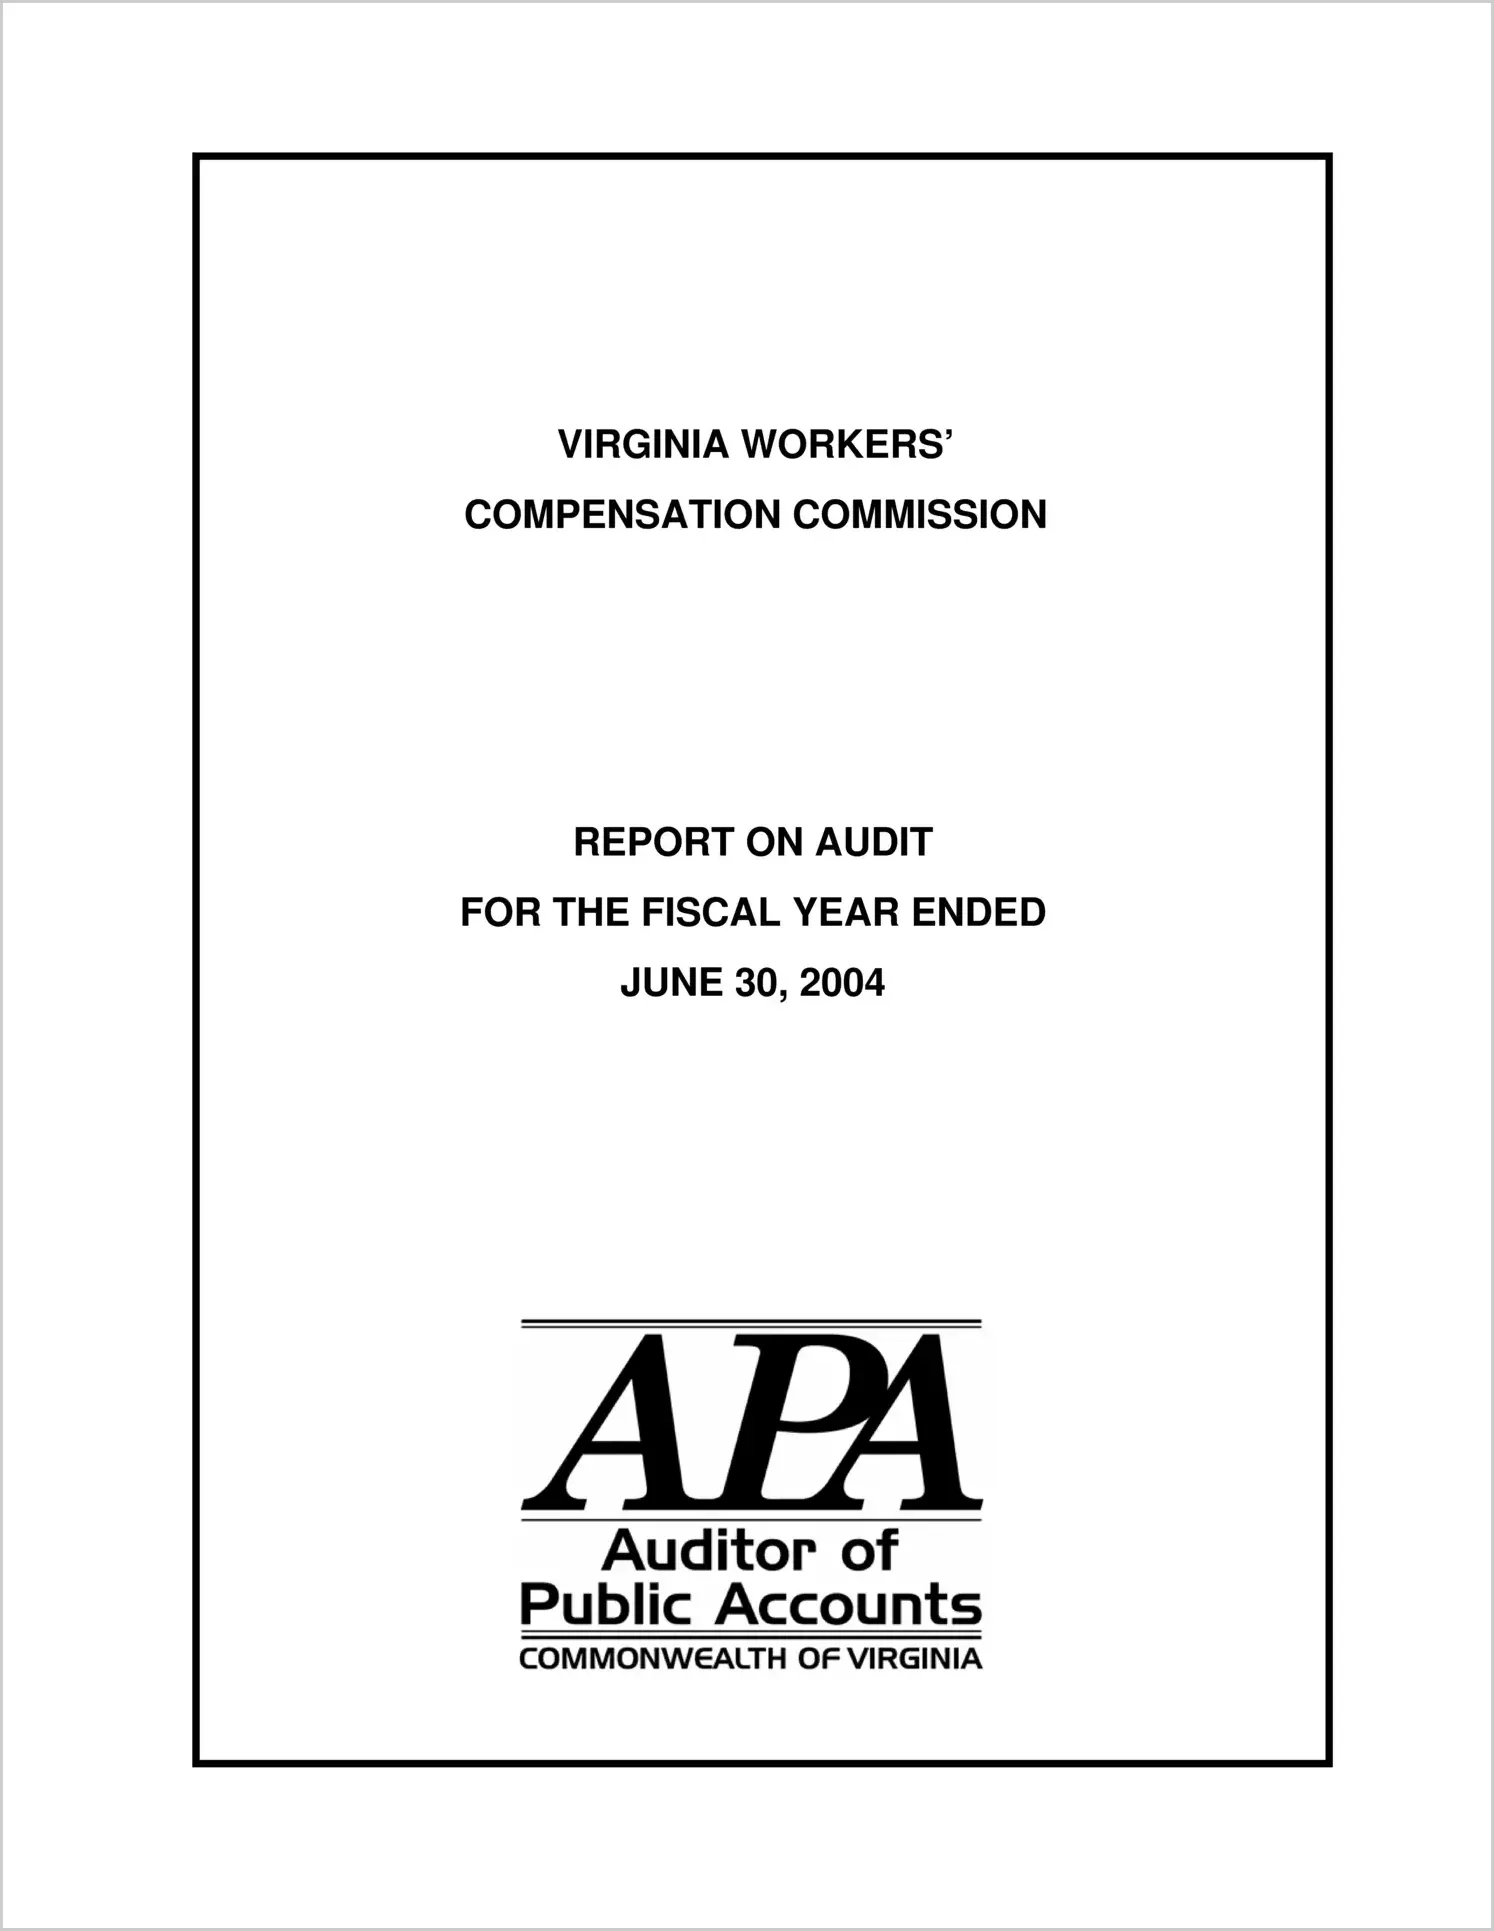 Virginia Workers` Compensation Commission for the fiscal year ended June 30, 2004